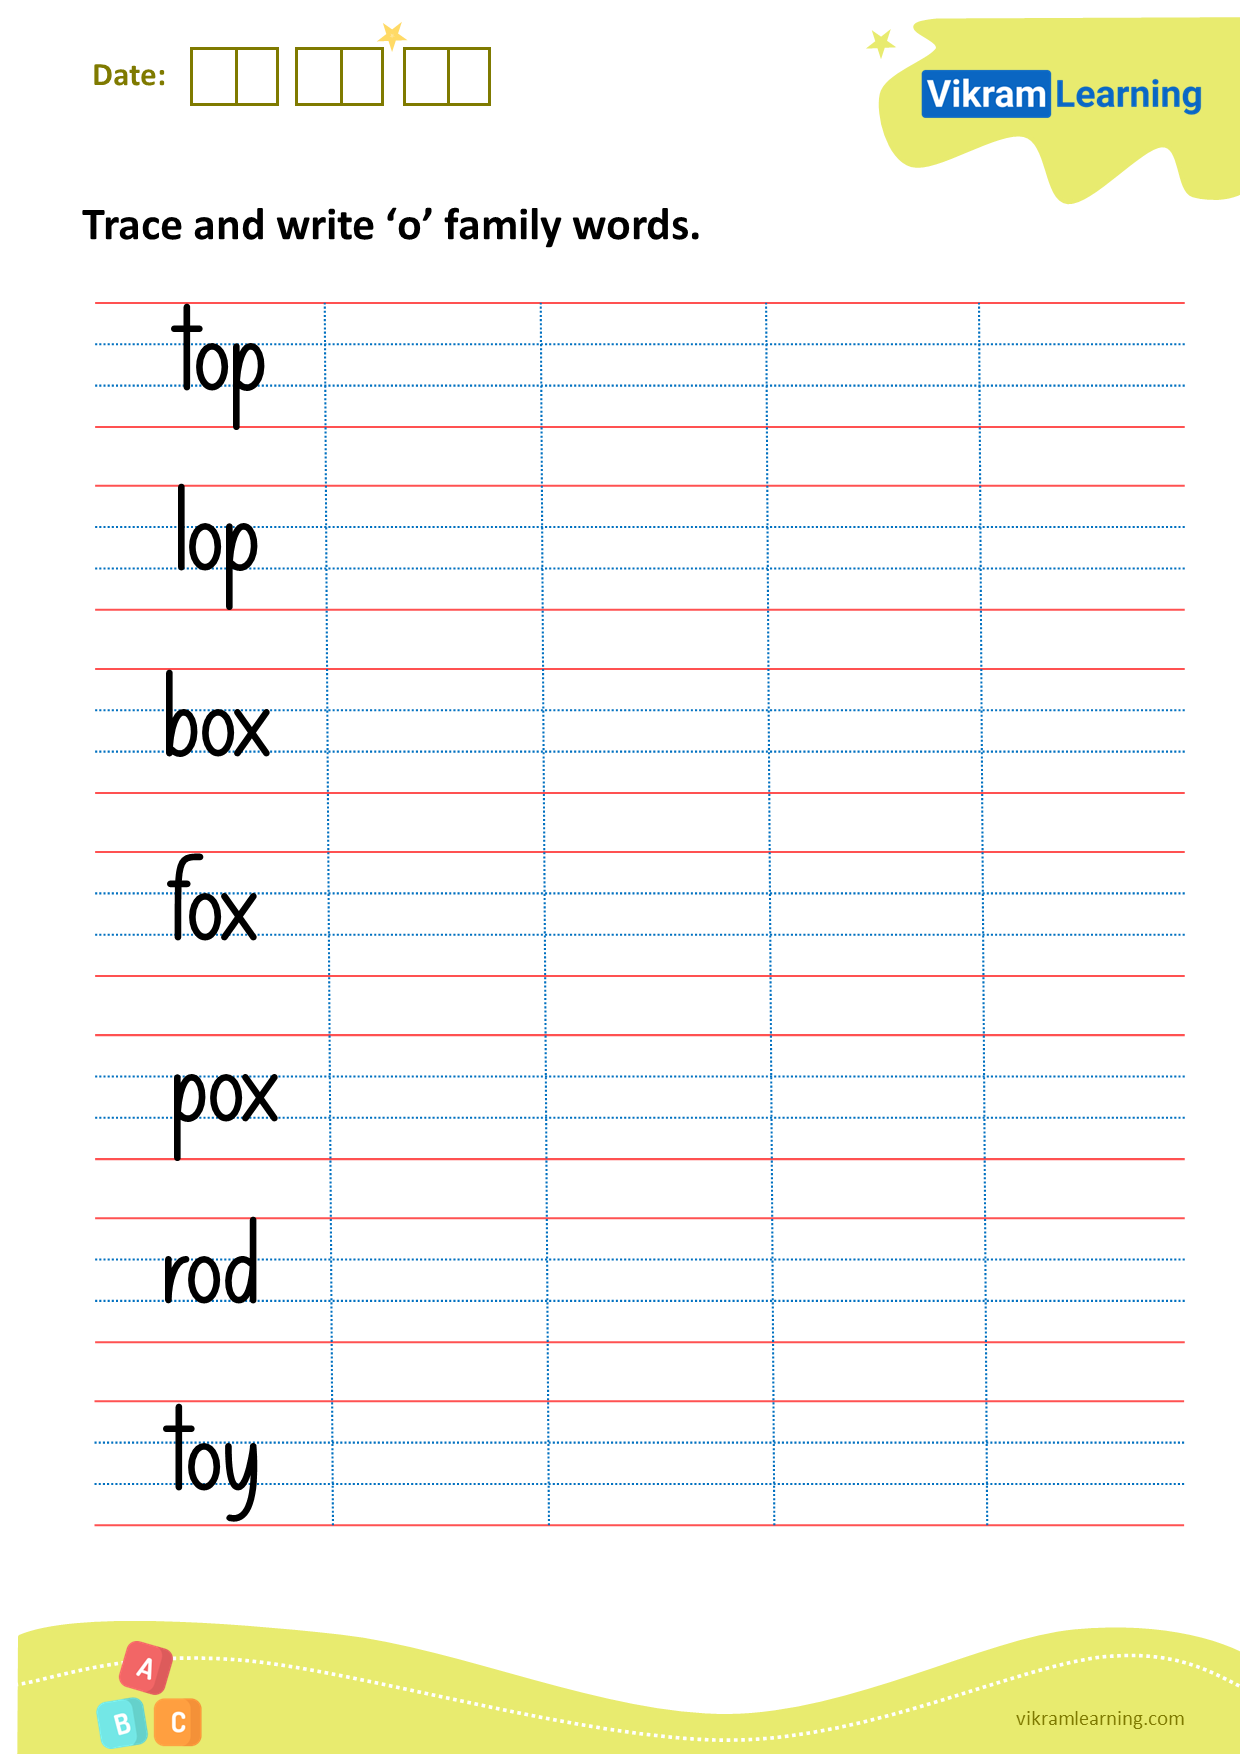 Download trace and write ‘o’ family words worksheets